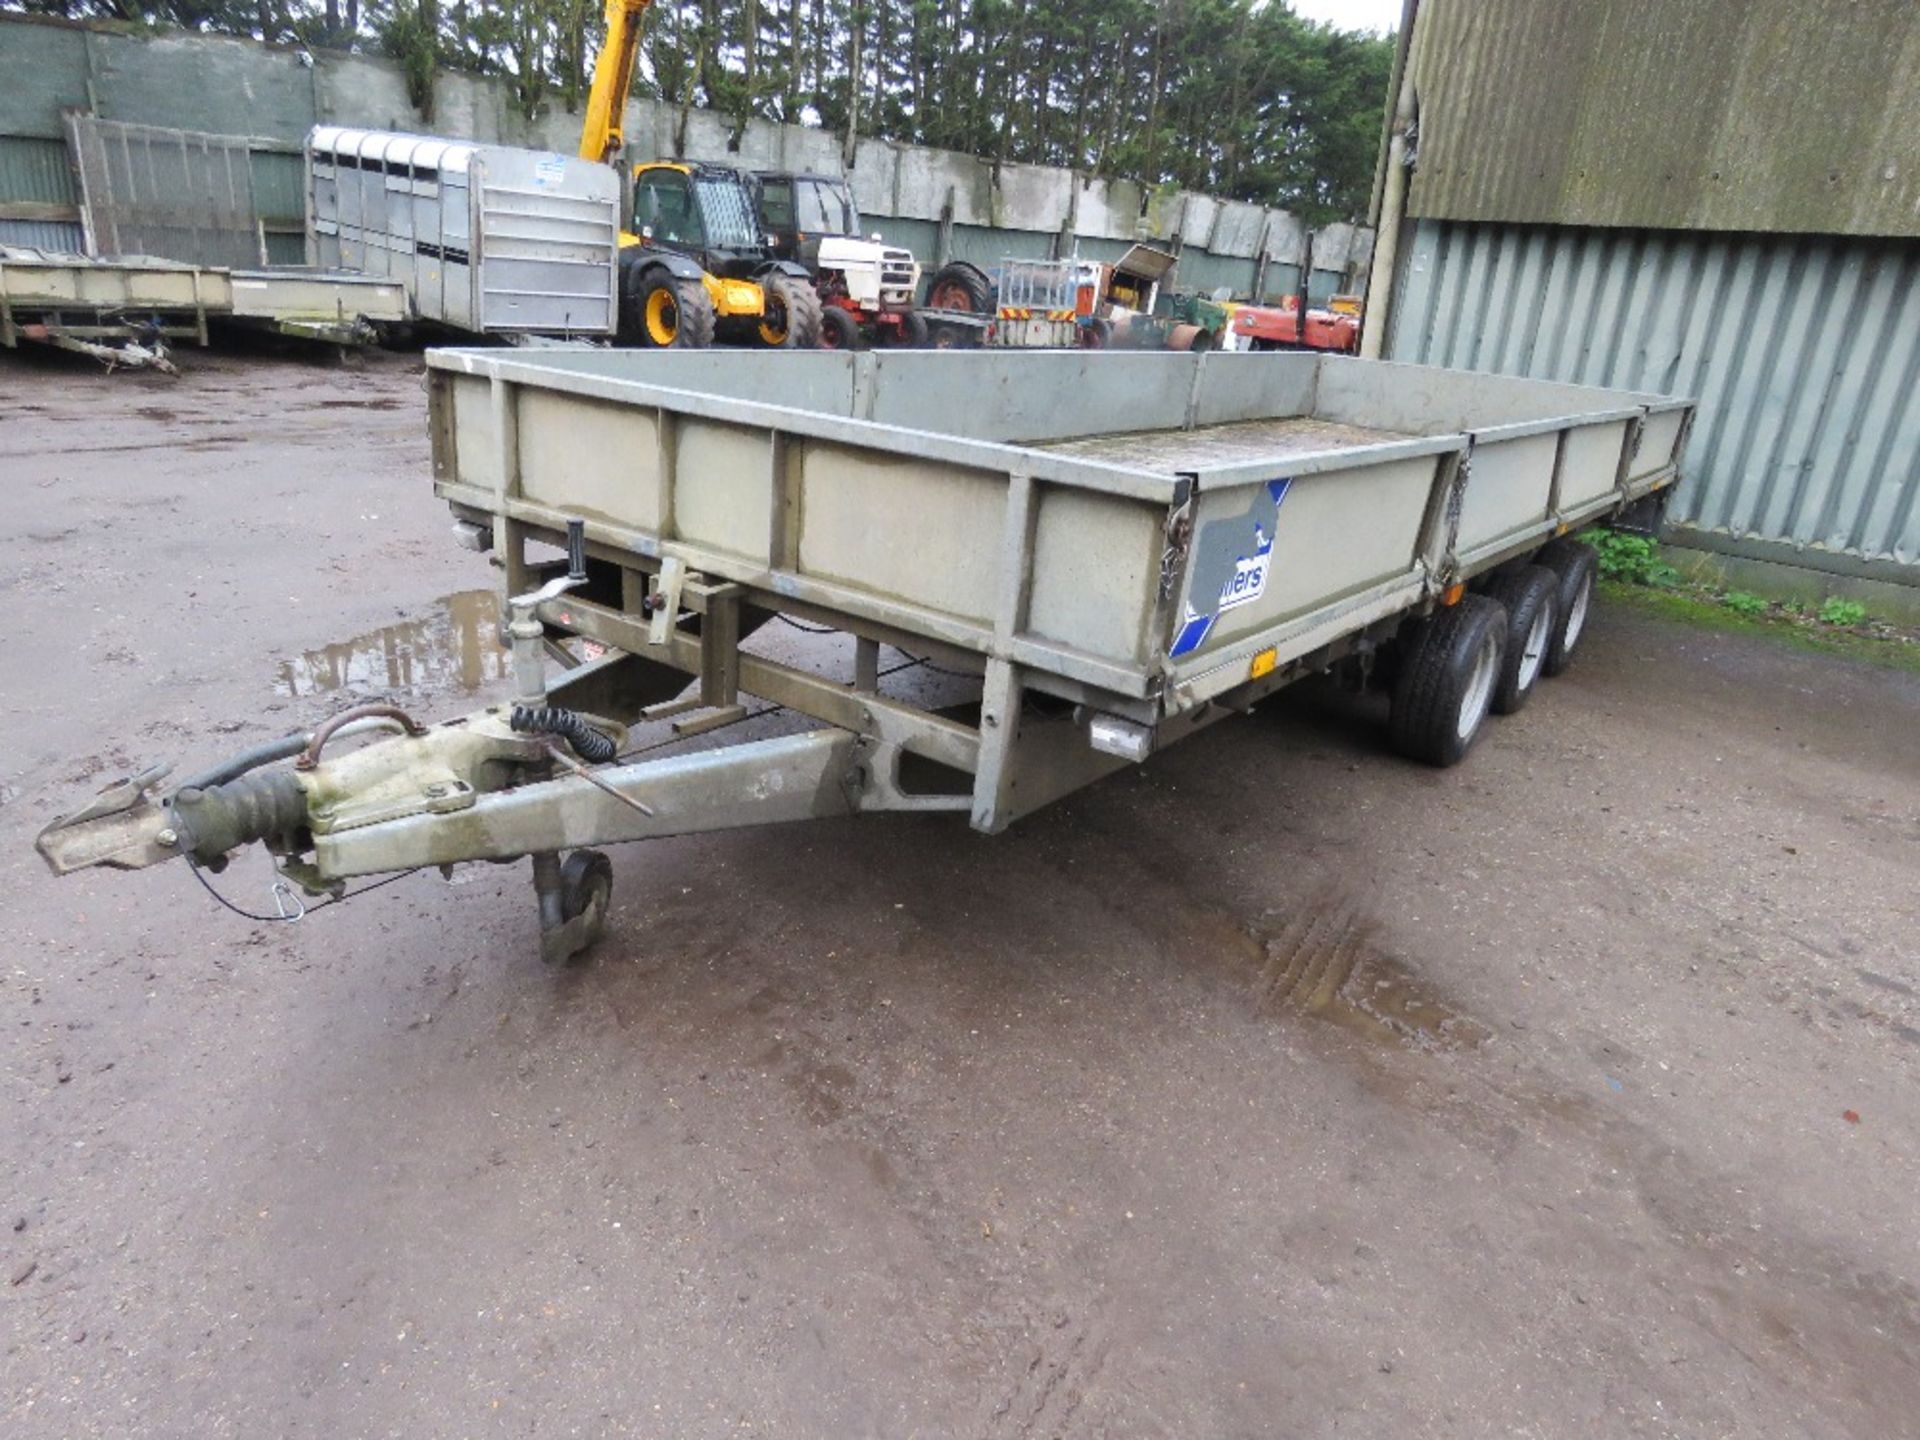 IFOR WILLIAMS LM186G3 TRIAXLED PLANT TRAILER. 18FT LENGTH X 6FT WIDTH WITH SIDES. SN:SCK800000C50854